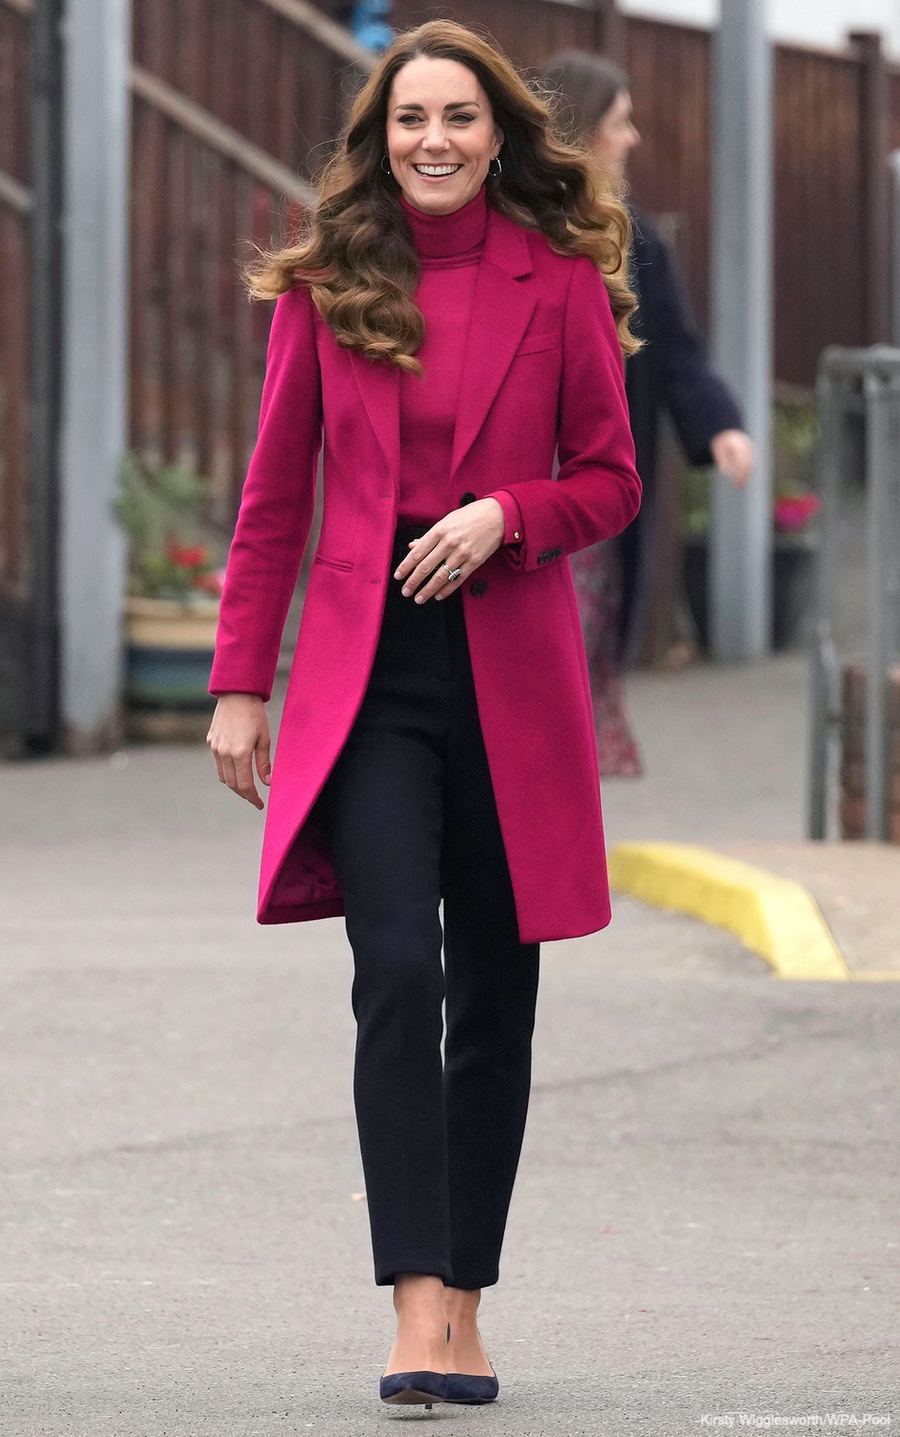 Back to school! Kate wears pink coat & matching jumper for science lesson